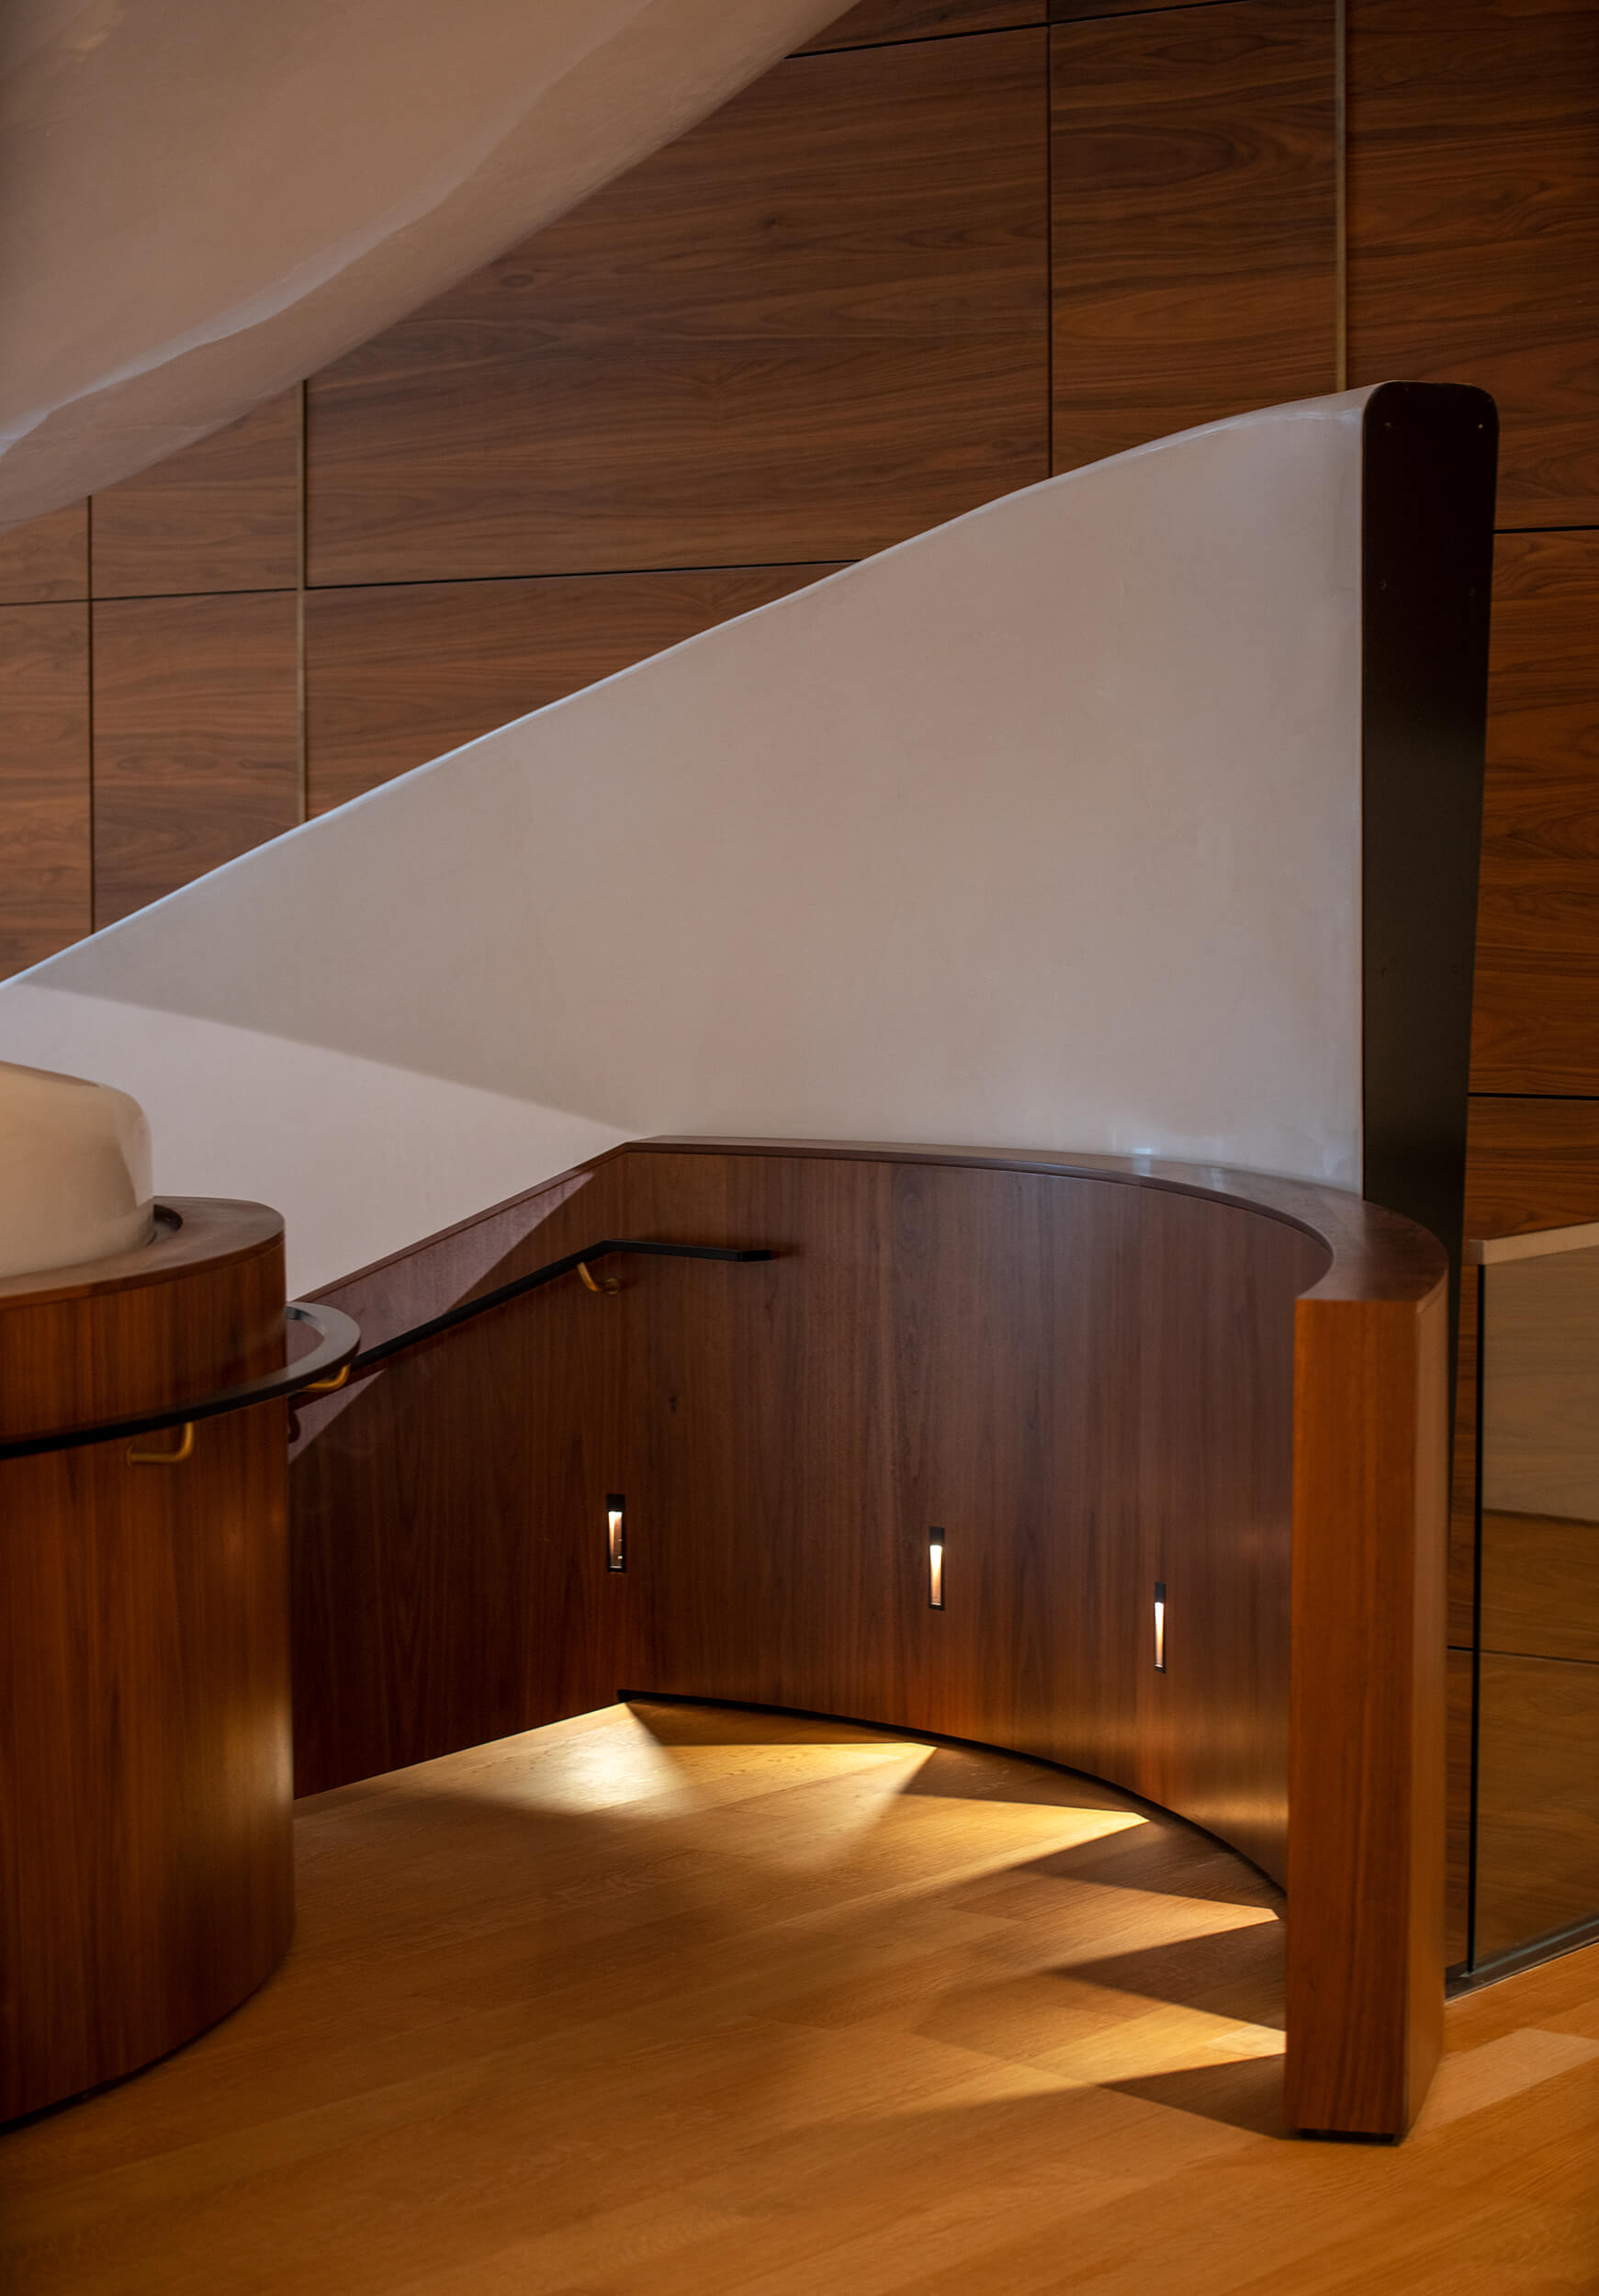 Internal section of a wood clad staircase at the Museum of the American Arts and Crafts Movement